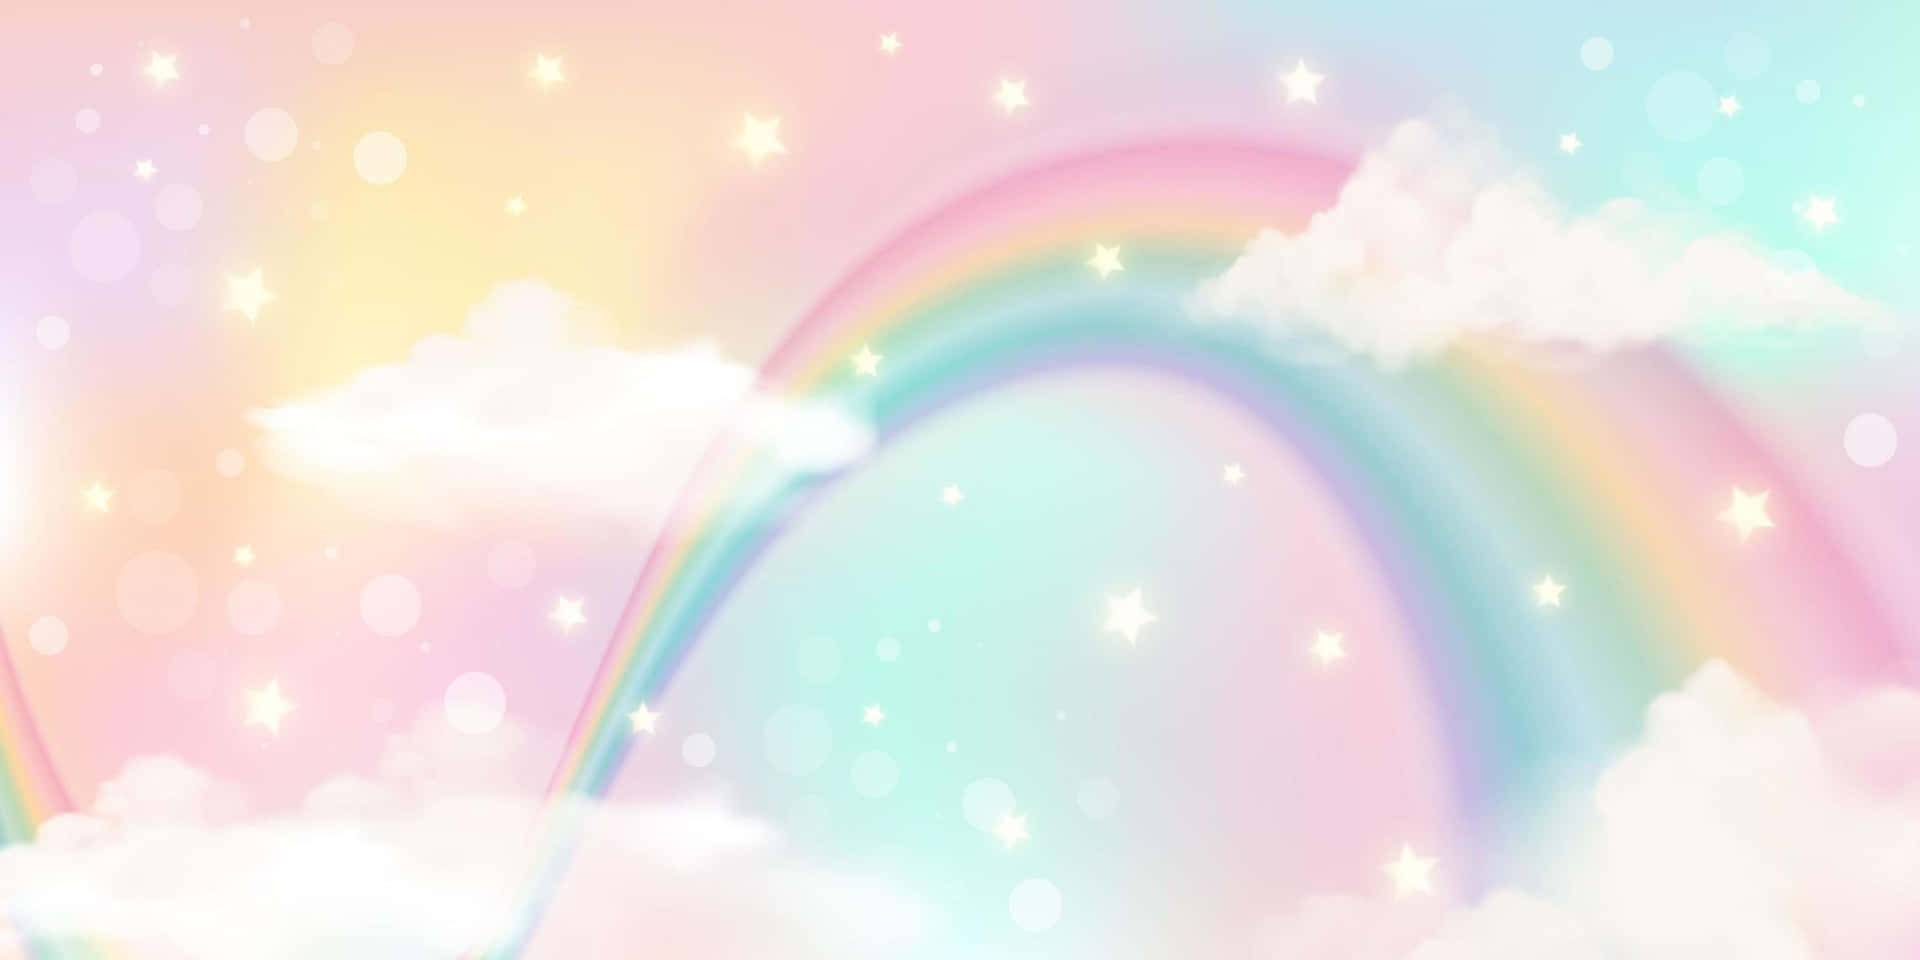 Brighten Up Your Day with This Cute Rainbow Pastel Wallpaper